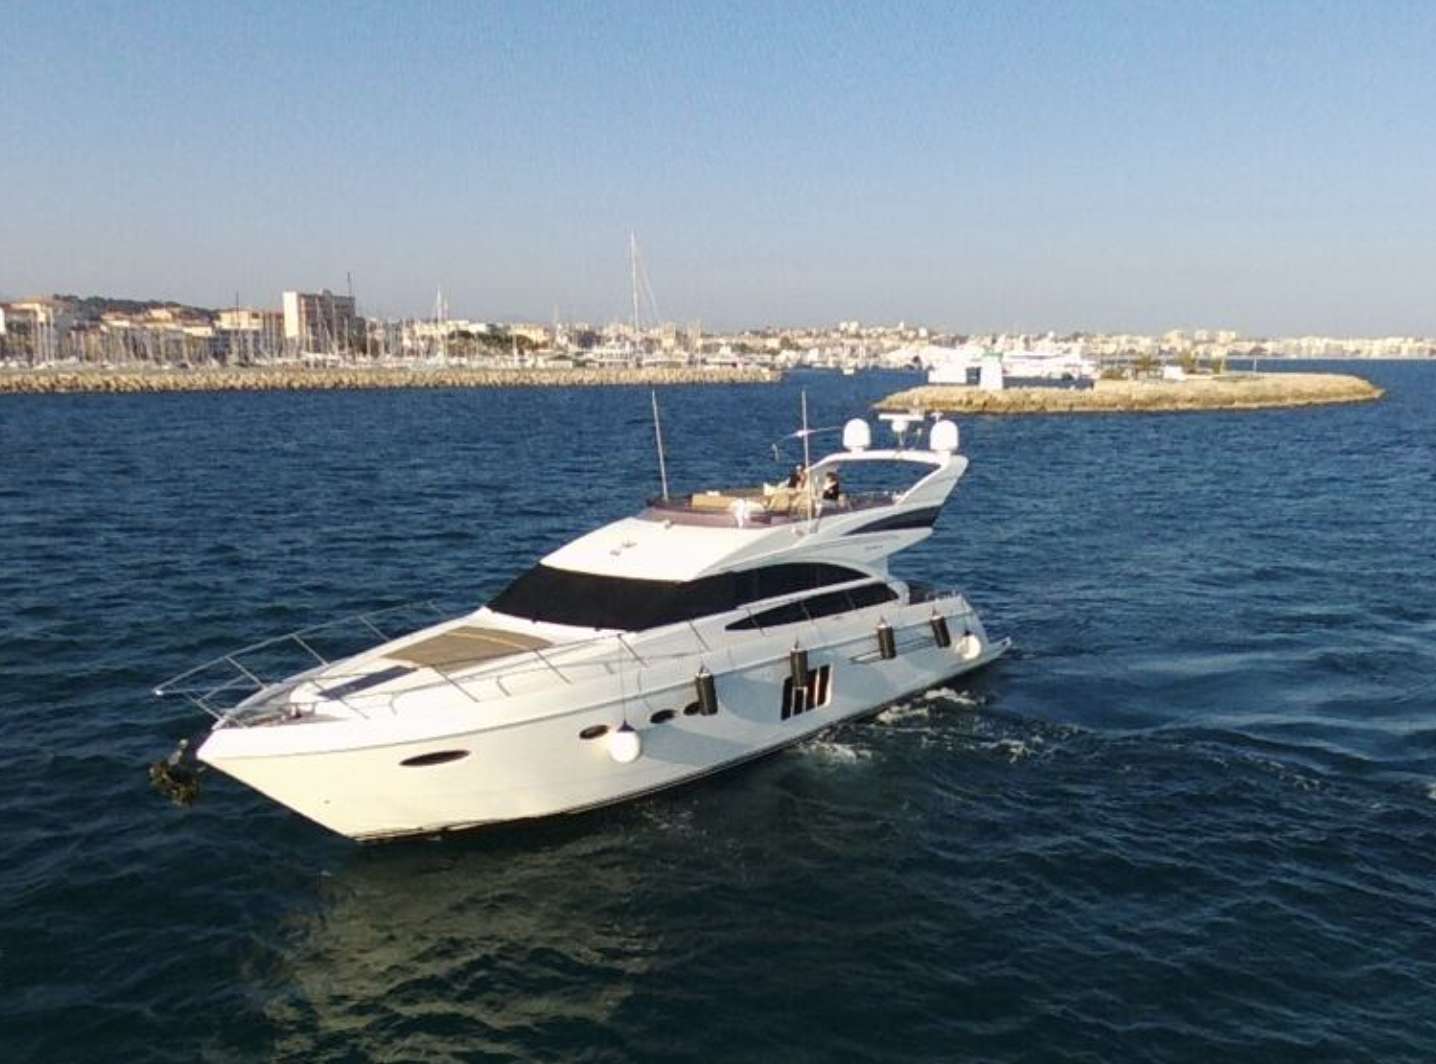 Princess 64 - Luxury yacht charter France & Boat hire in France French Riviera Frejus Port Fréjus 3